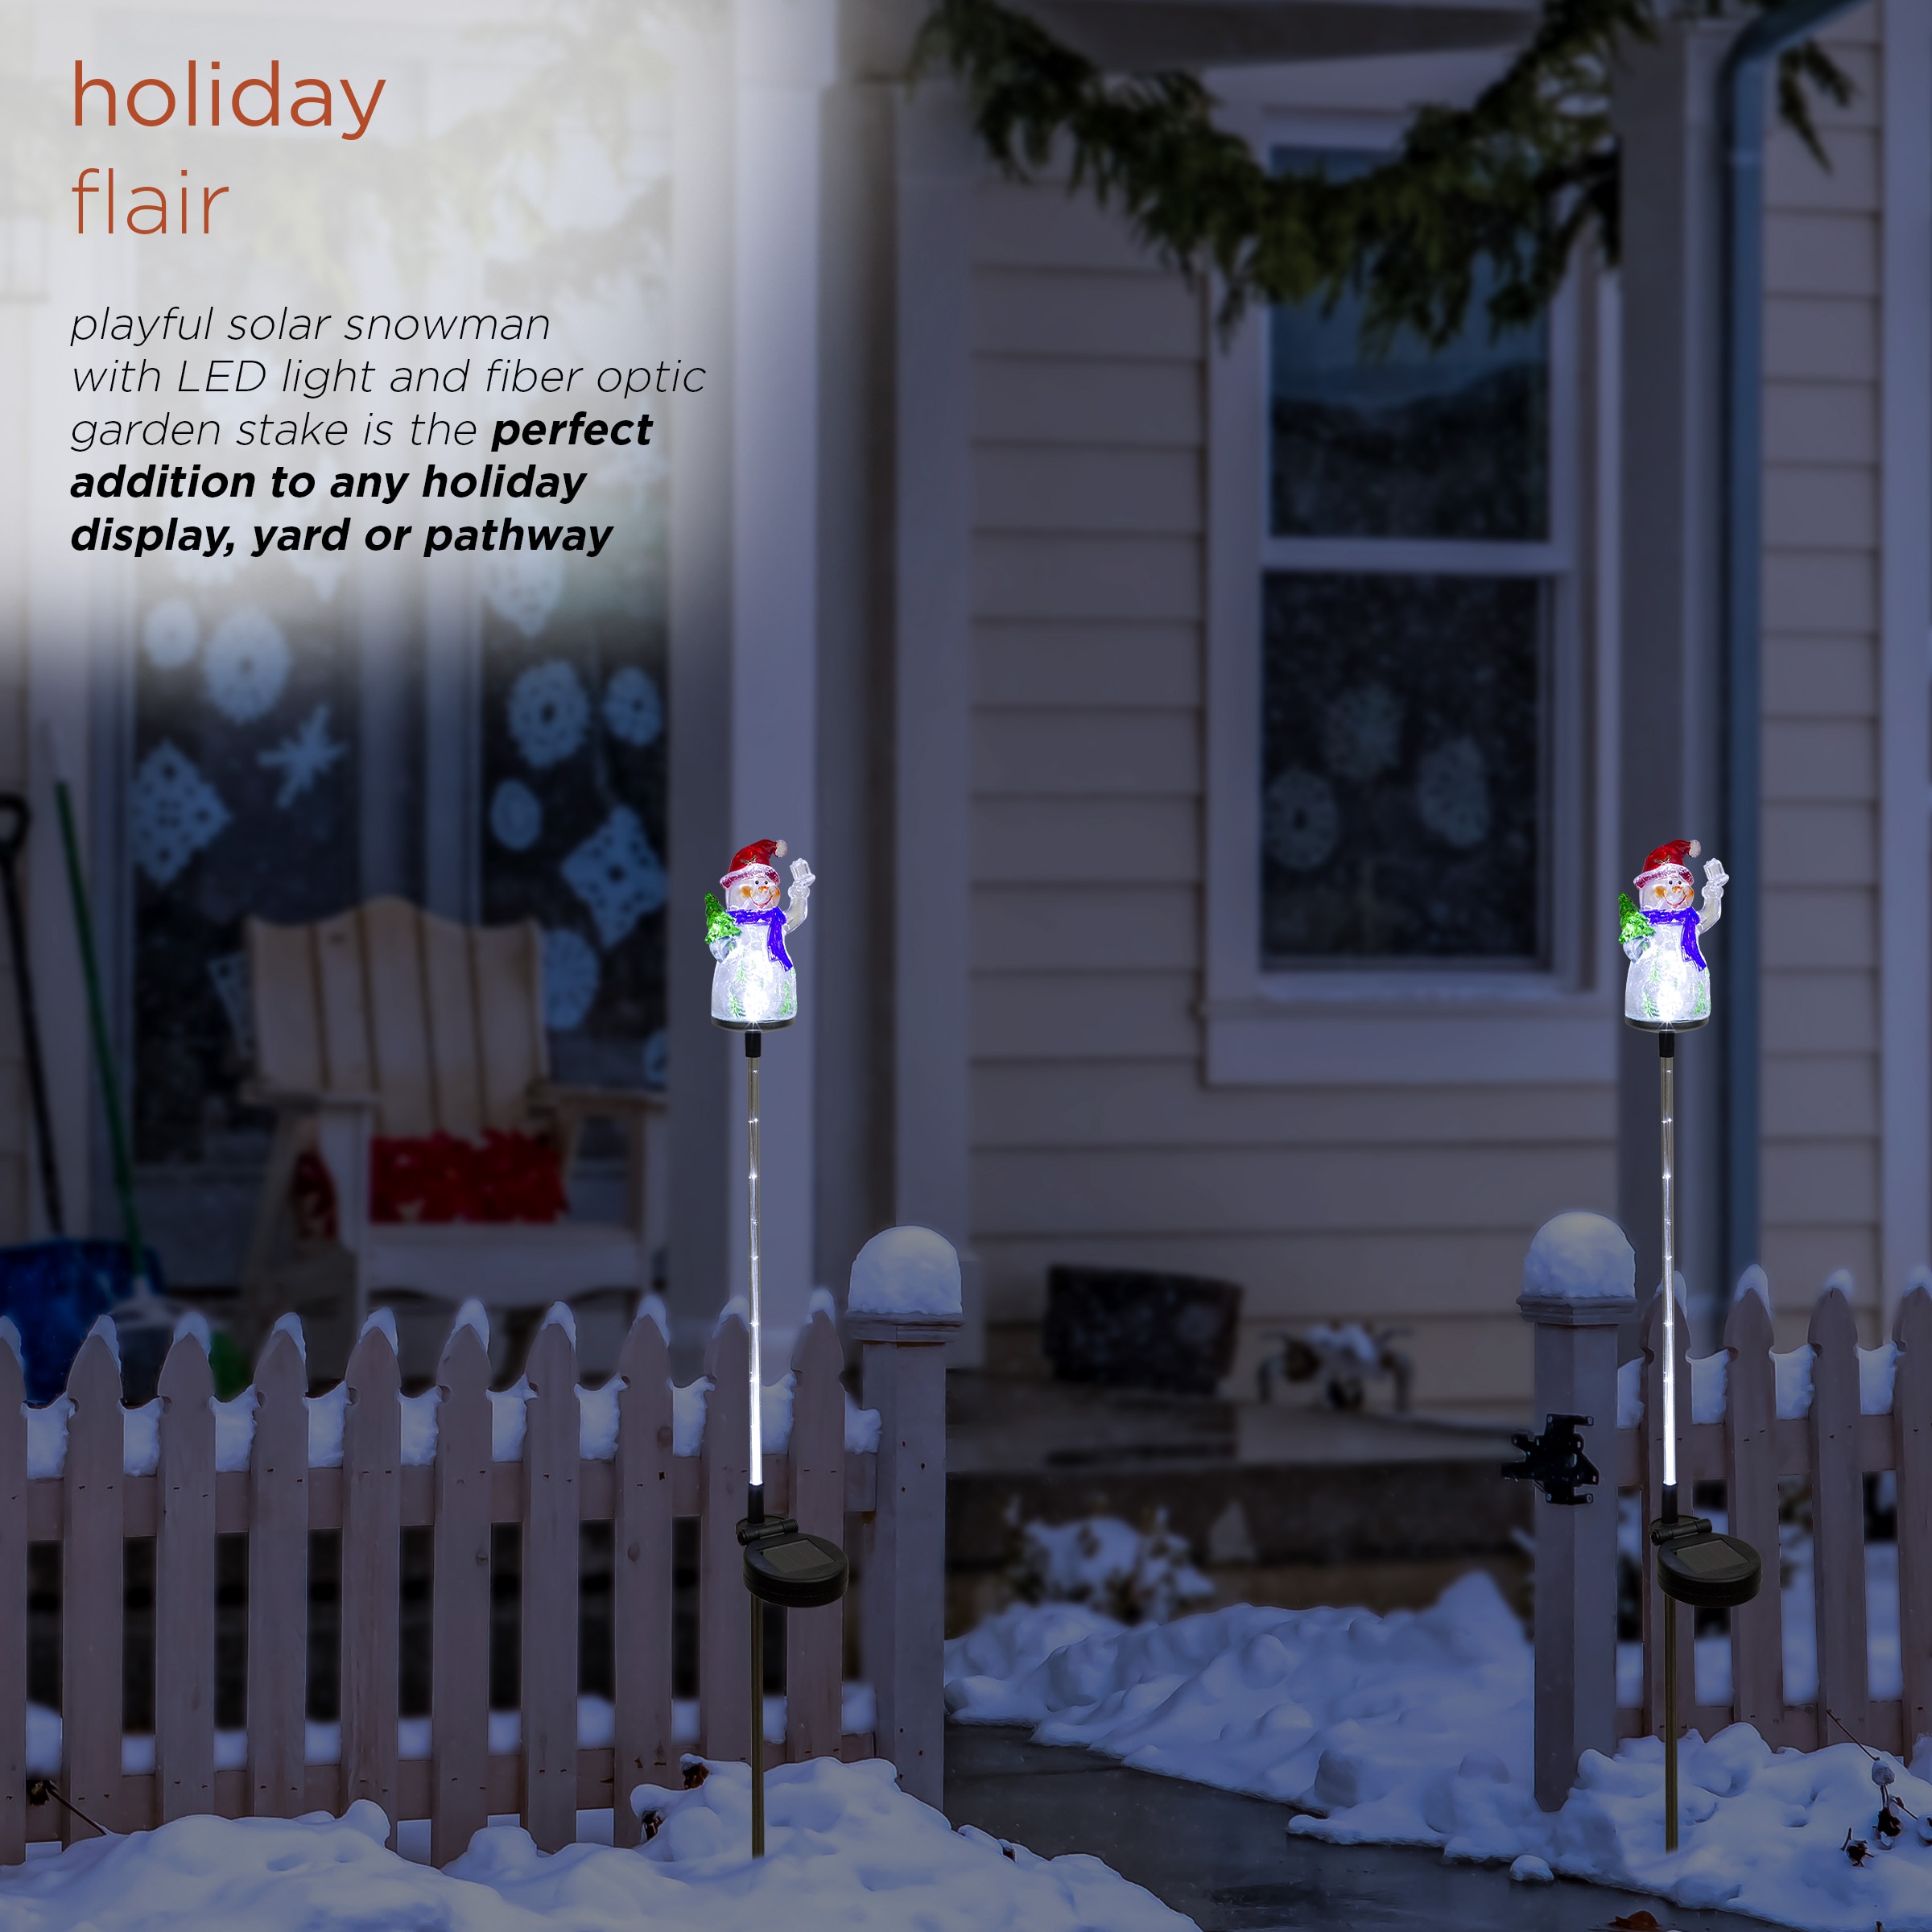 Set of 3 Multi-Color Changing Christmas Snowman Lights Litake Solar Garden Stake Lights Outdoor Solar Powered LED Garden Lights with a Purple LED Lights Stake for Patio Lawn Christmas Holiday Decor 